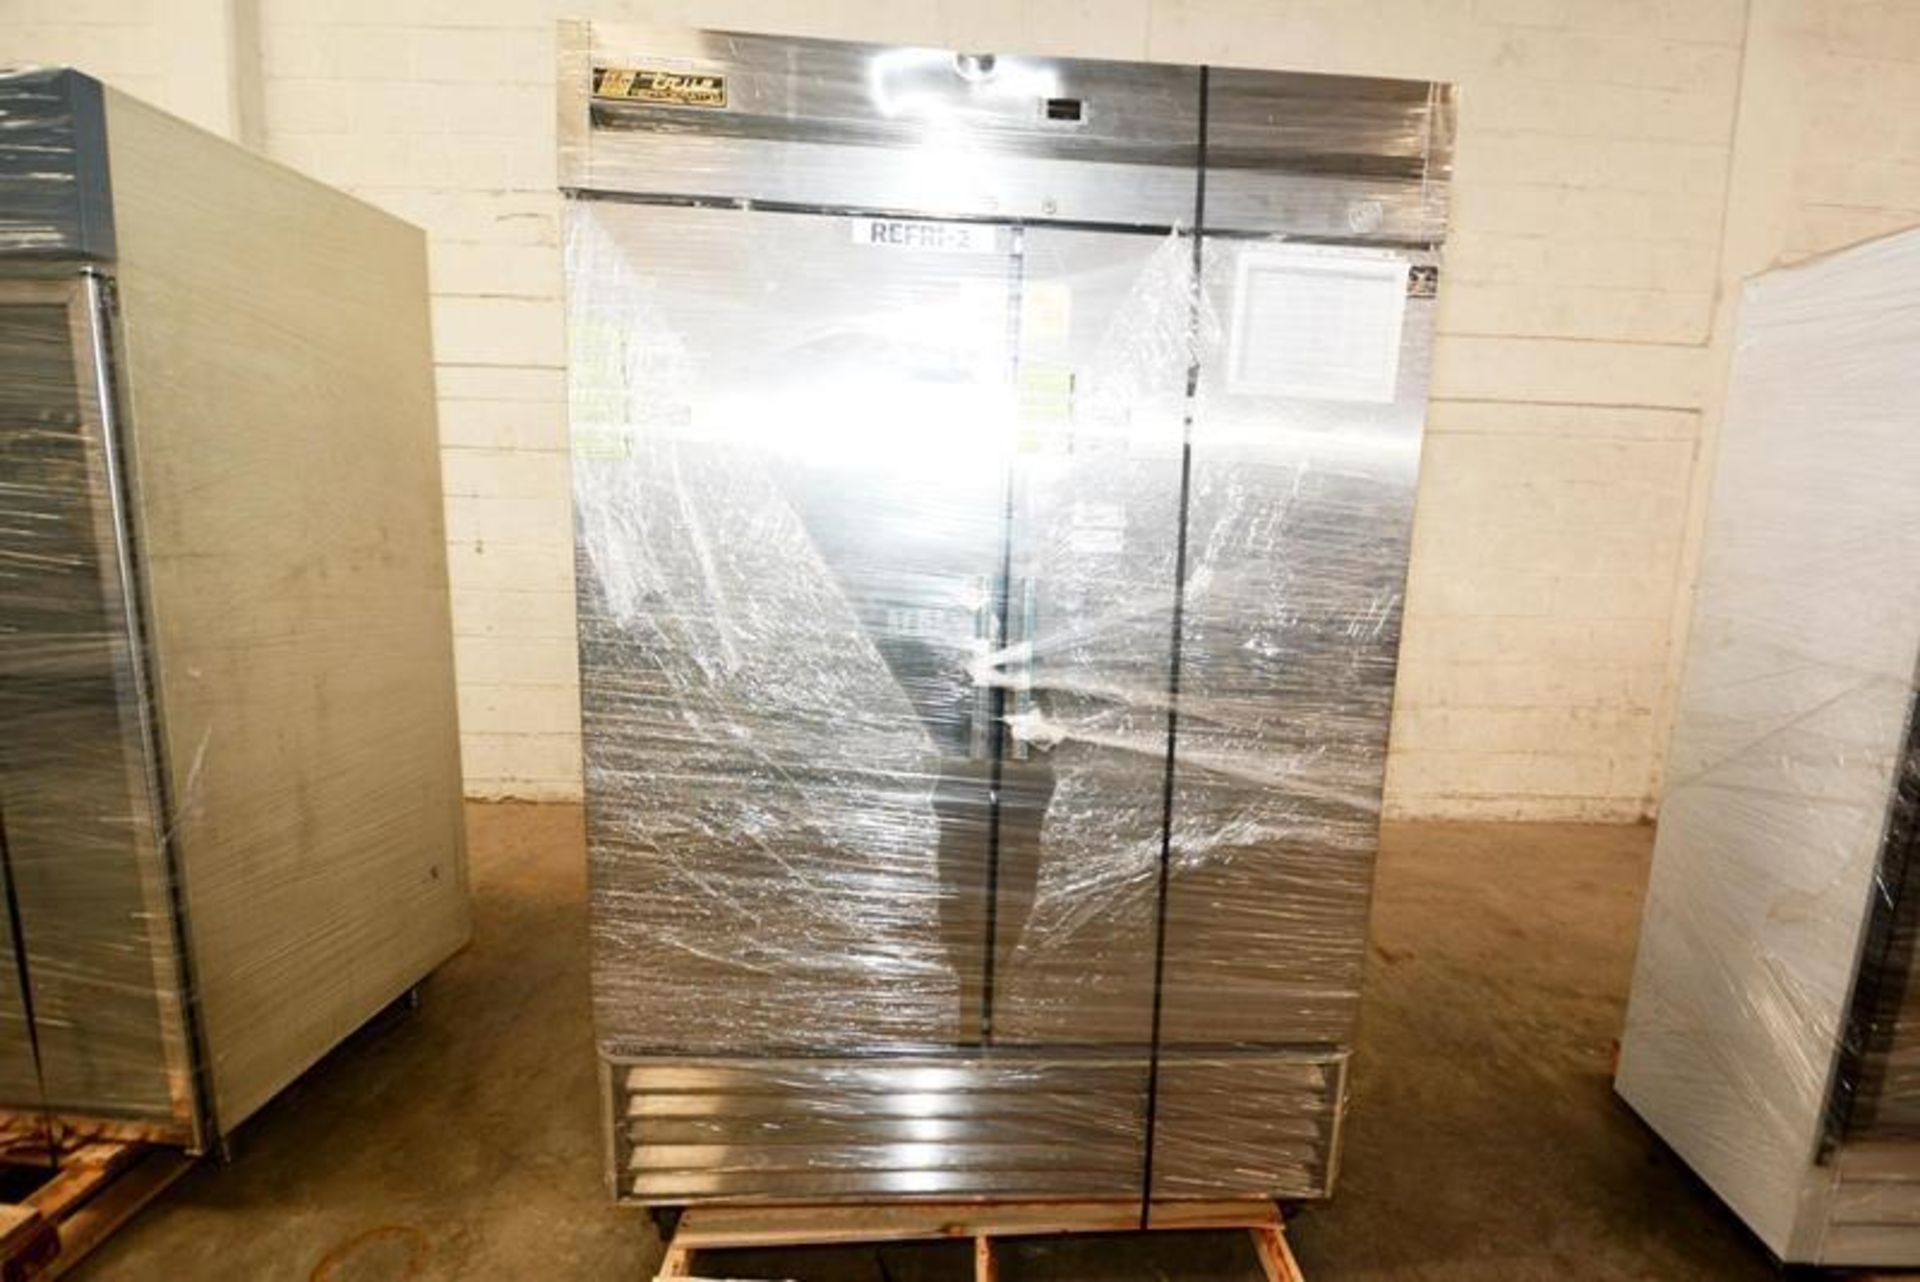 Refrigerator used to keep samples at the QC and testing lab. Located in Cd. Juarez.  Refrigerador - Image 5 of 12